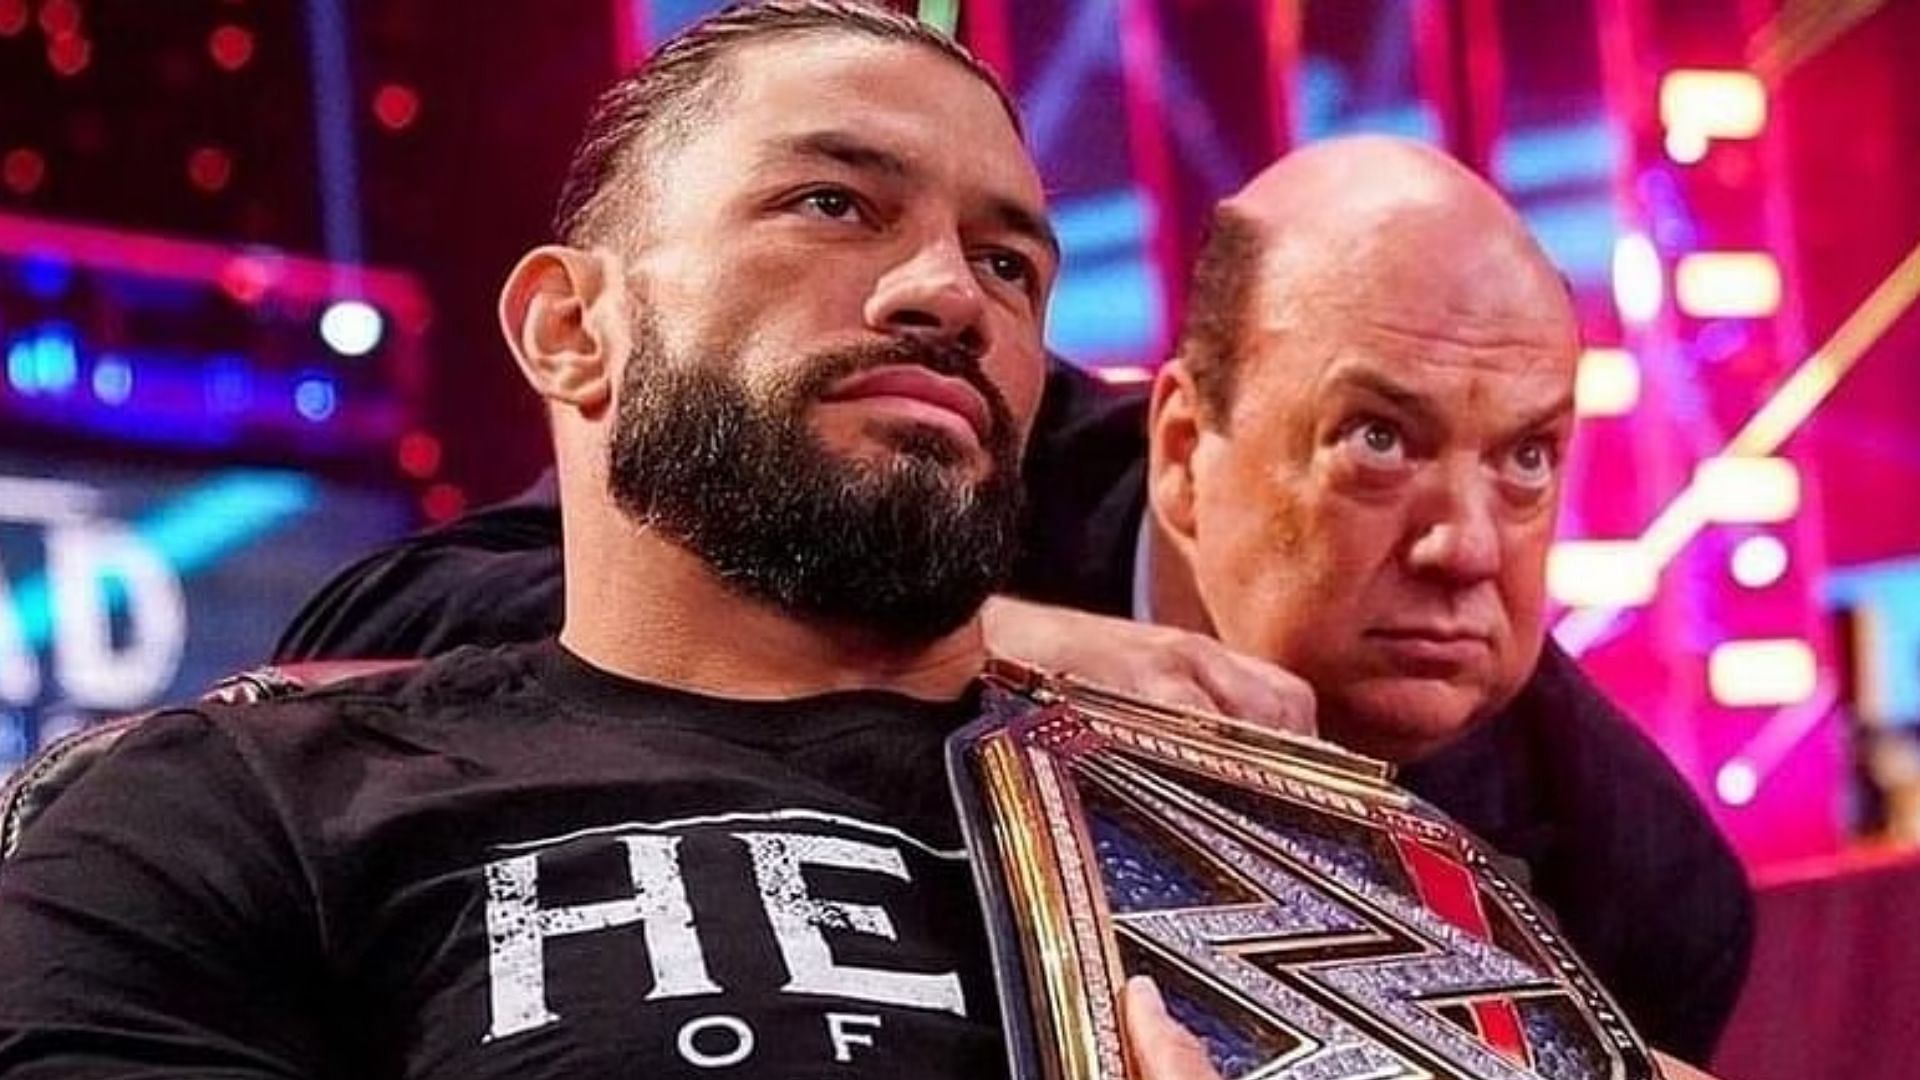 Paul Heyman and Roman Reigns formed an alliance on-screen in 2020.